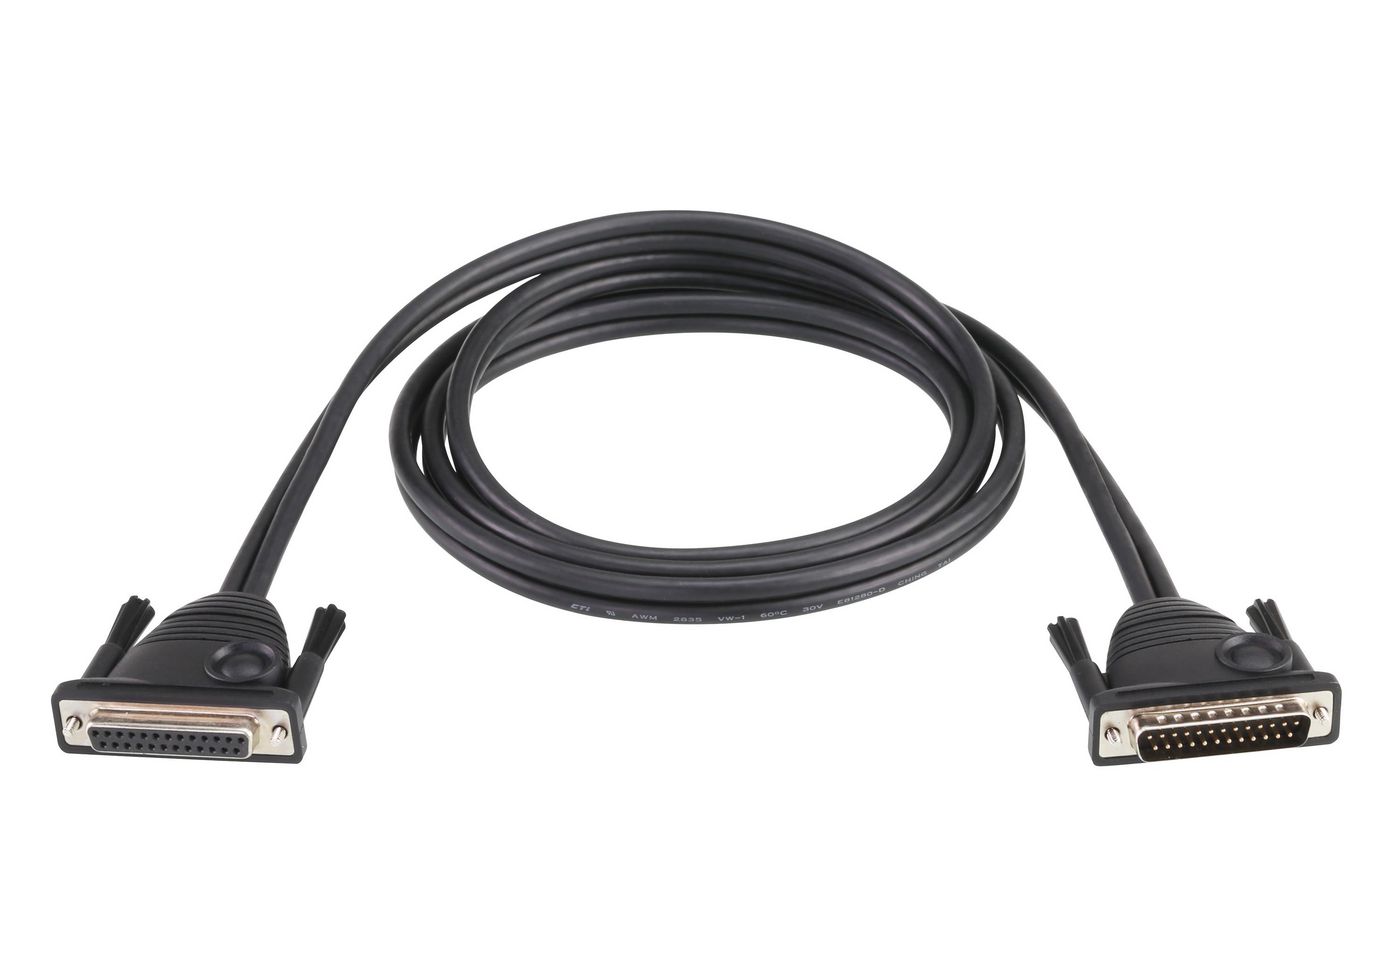 Daisy Chain Cable For KVM 3m - A2l2715